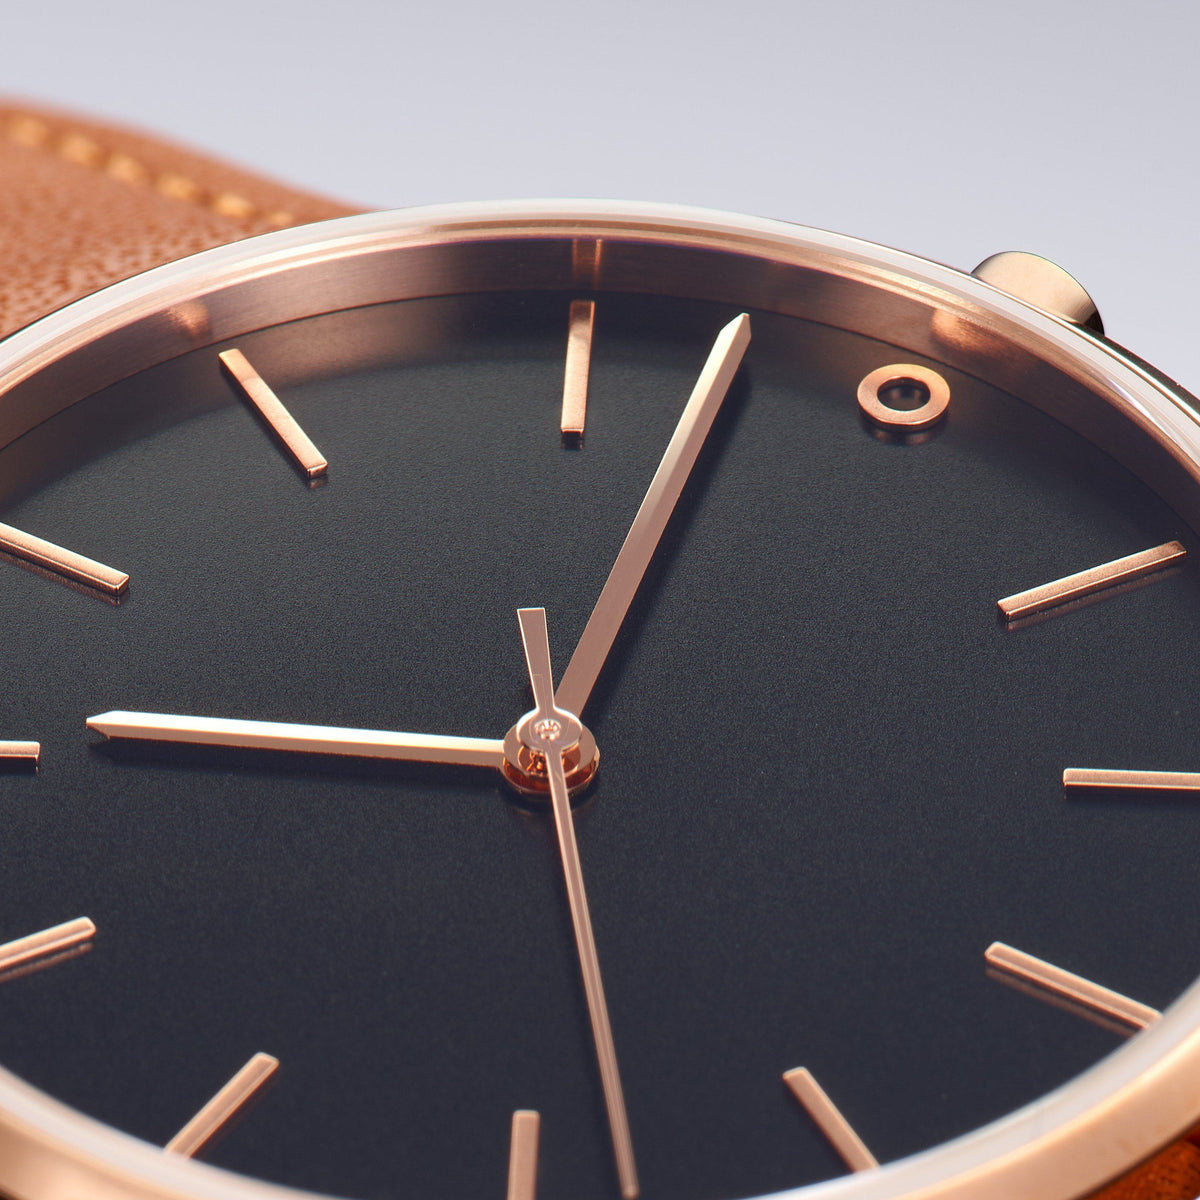 The Black and Rose Gold Watch - Leather